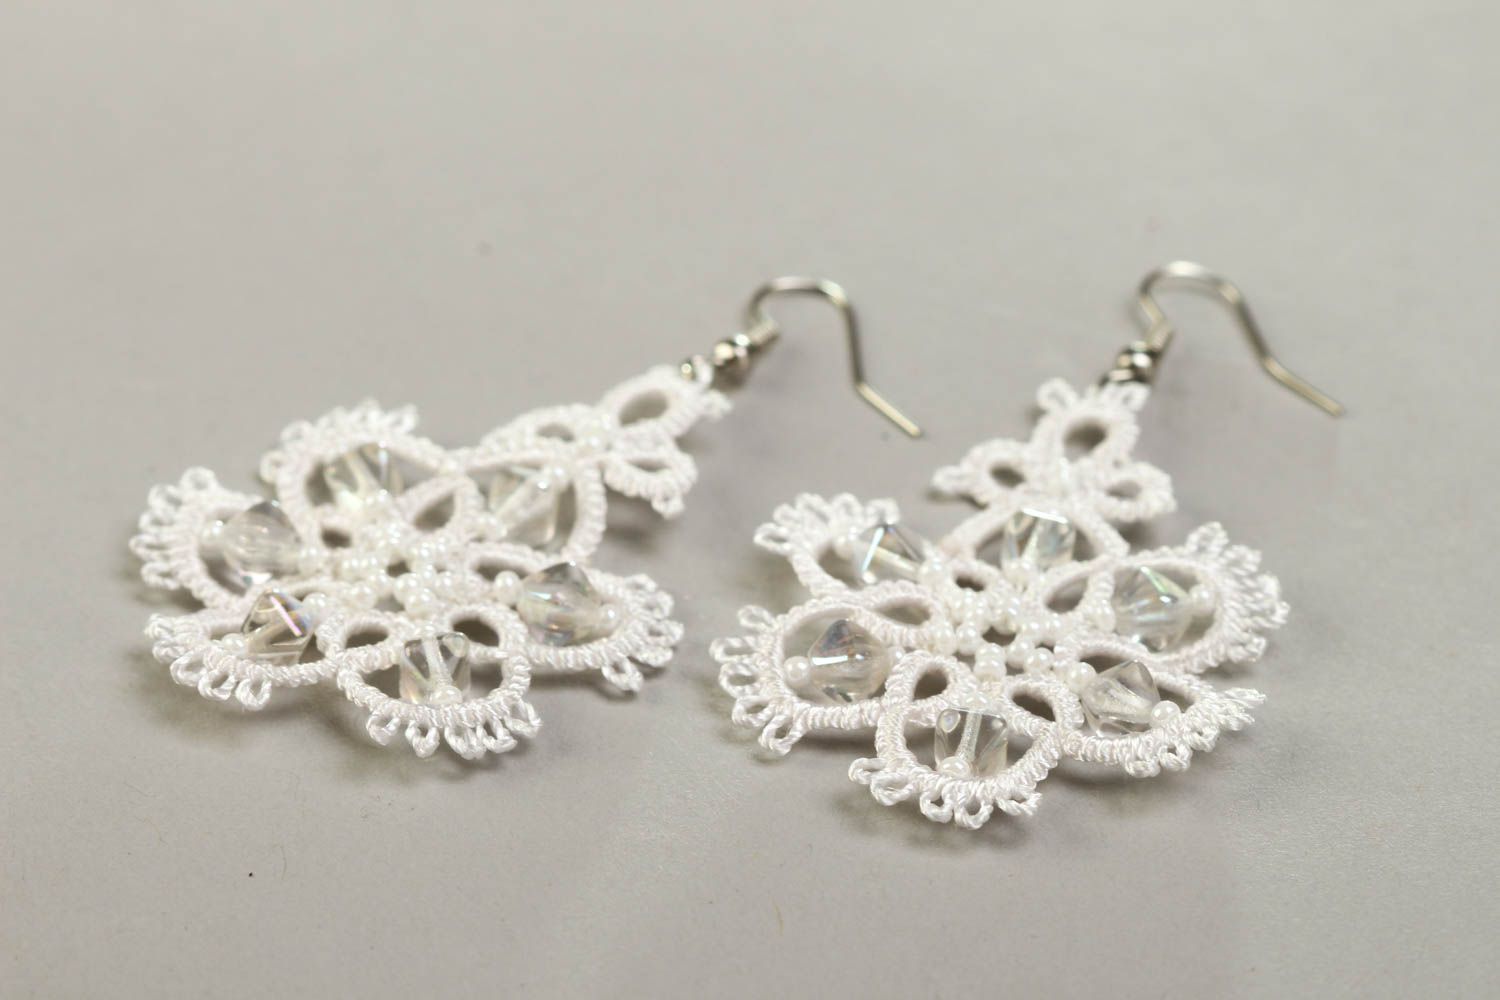 Stylish handmade textile earrings cool jewelry designs fashion accessories photo 3